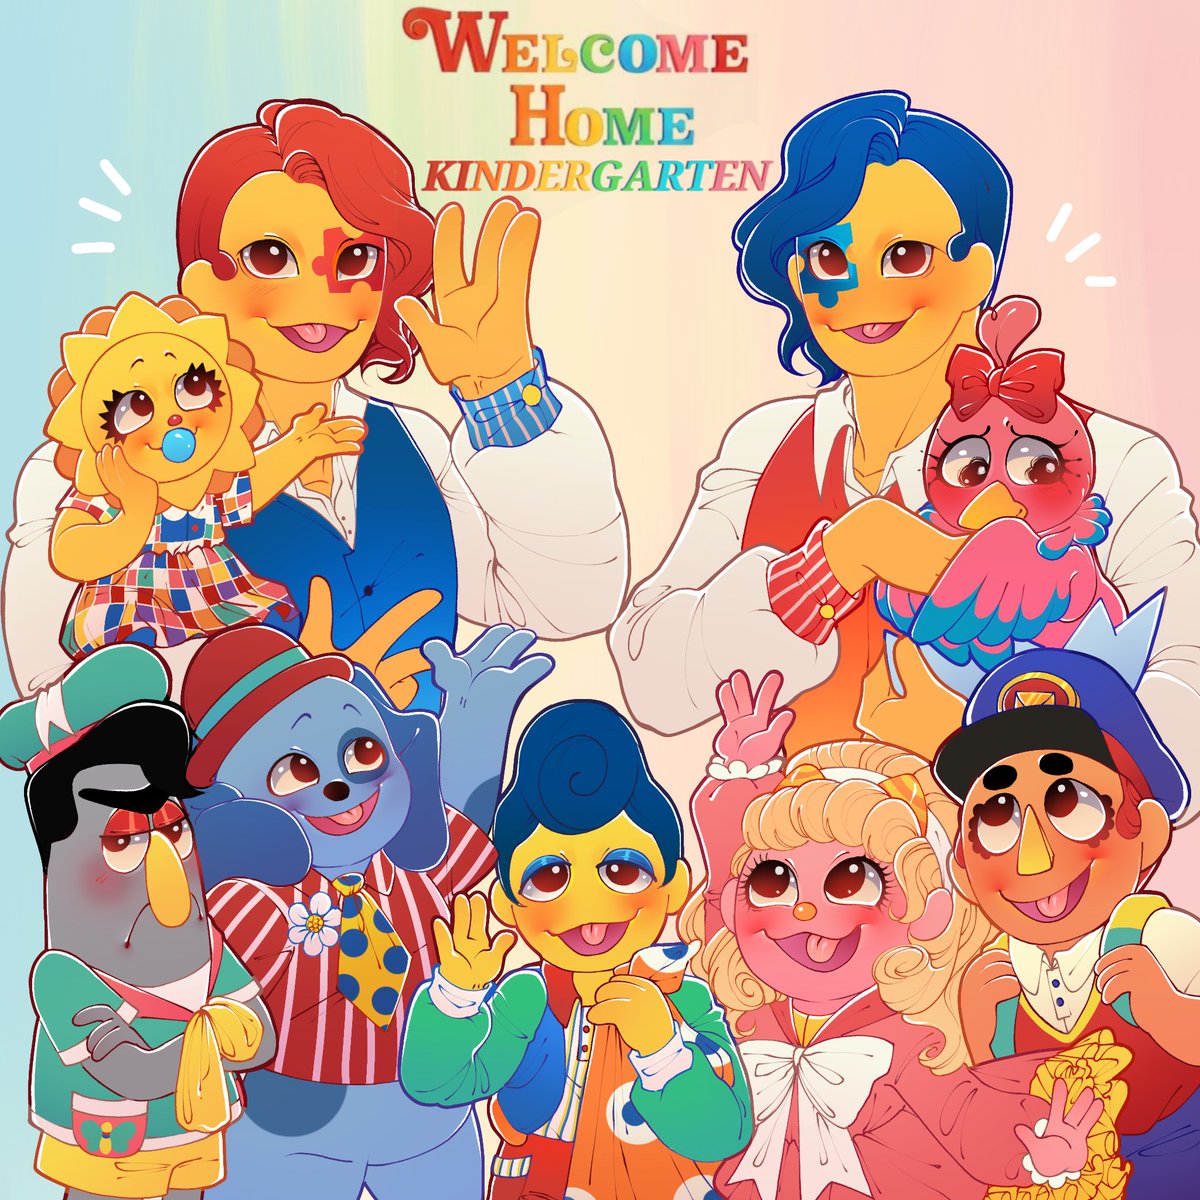 Oh nursery! 💗✨ then I bring comic!

#WelcomeHome #welcomehomearg #welcomehomepuppetshow #welcomehomefanart #welcomehomeoc #WelcomeHomeAU #WelcomeHomeWallyDarling